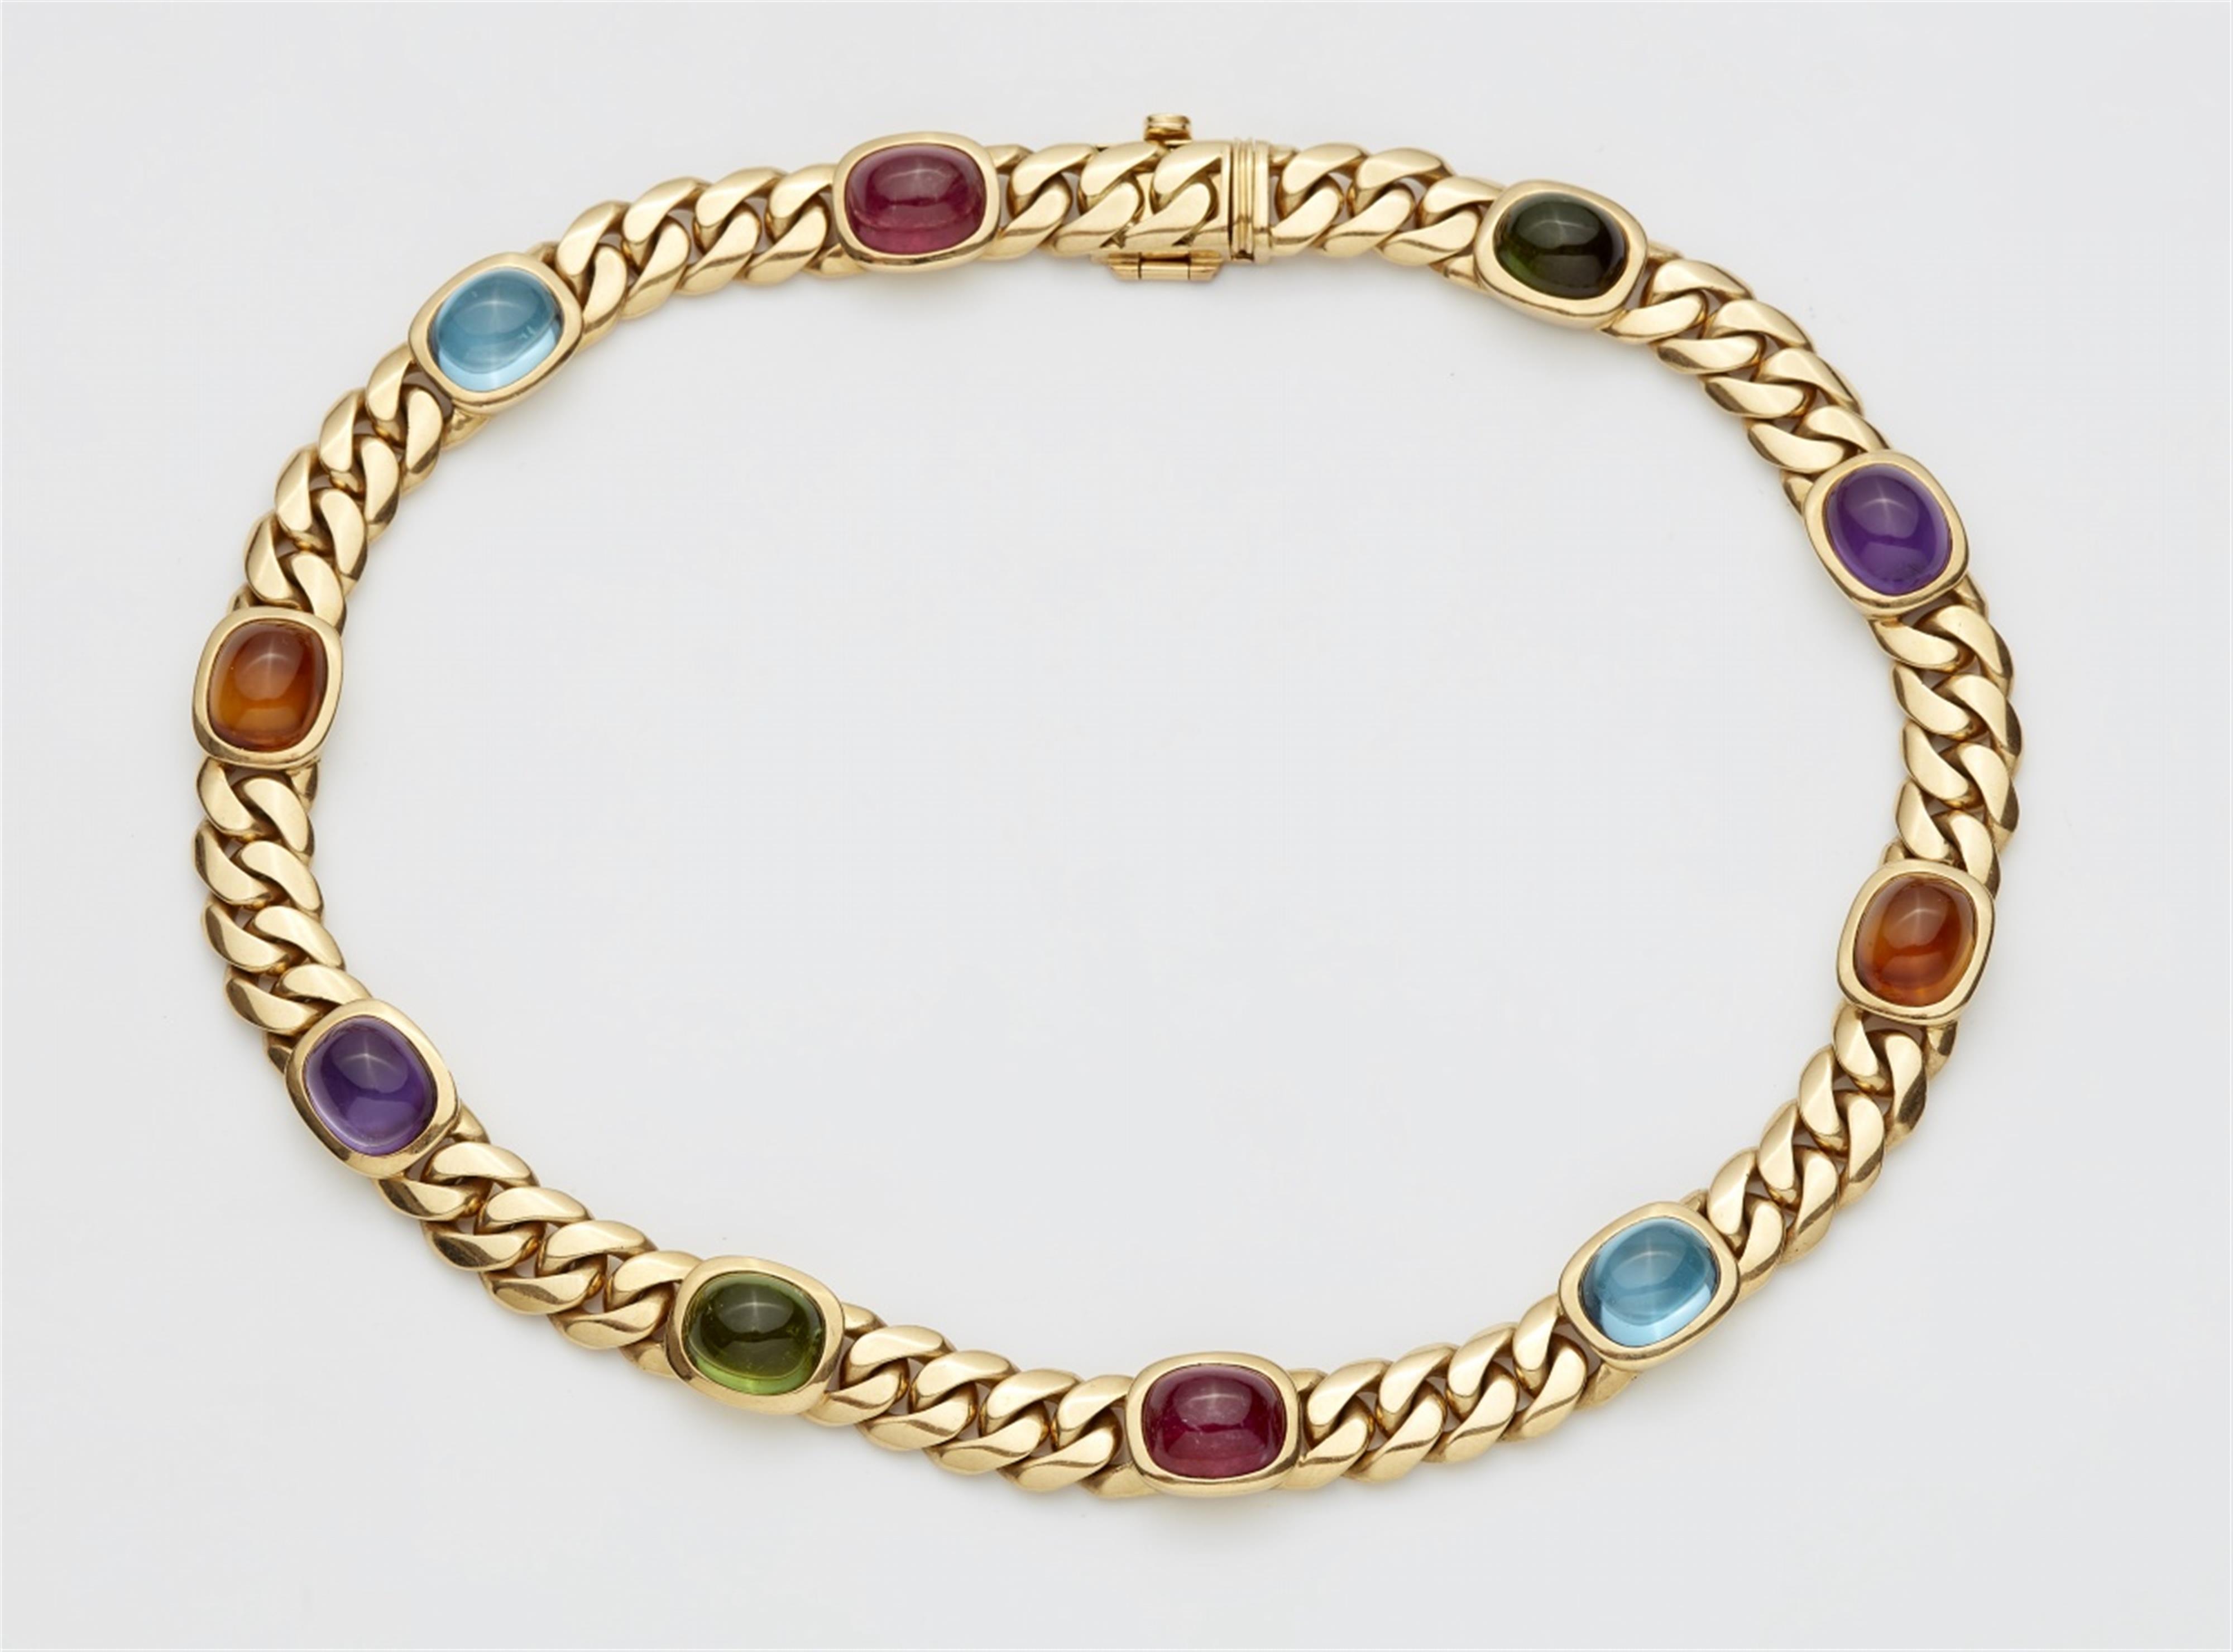 An 18k gold and coloured gemstone necklace - image-1